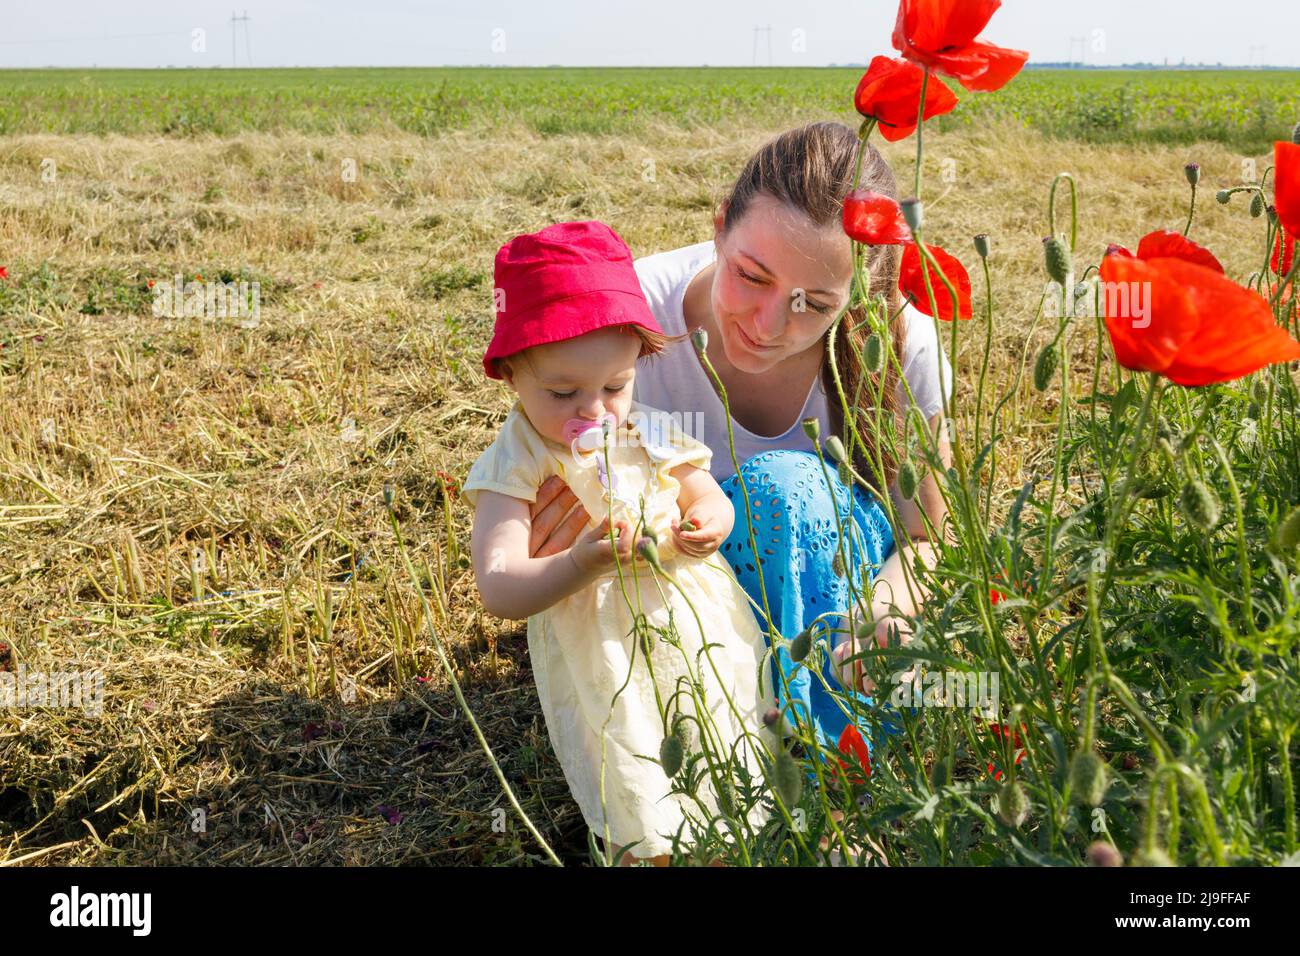 A daughter and her mother picking red poppy flowers Stock Photo